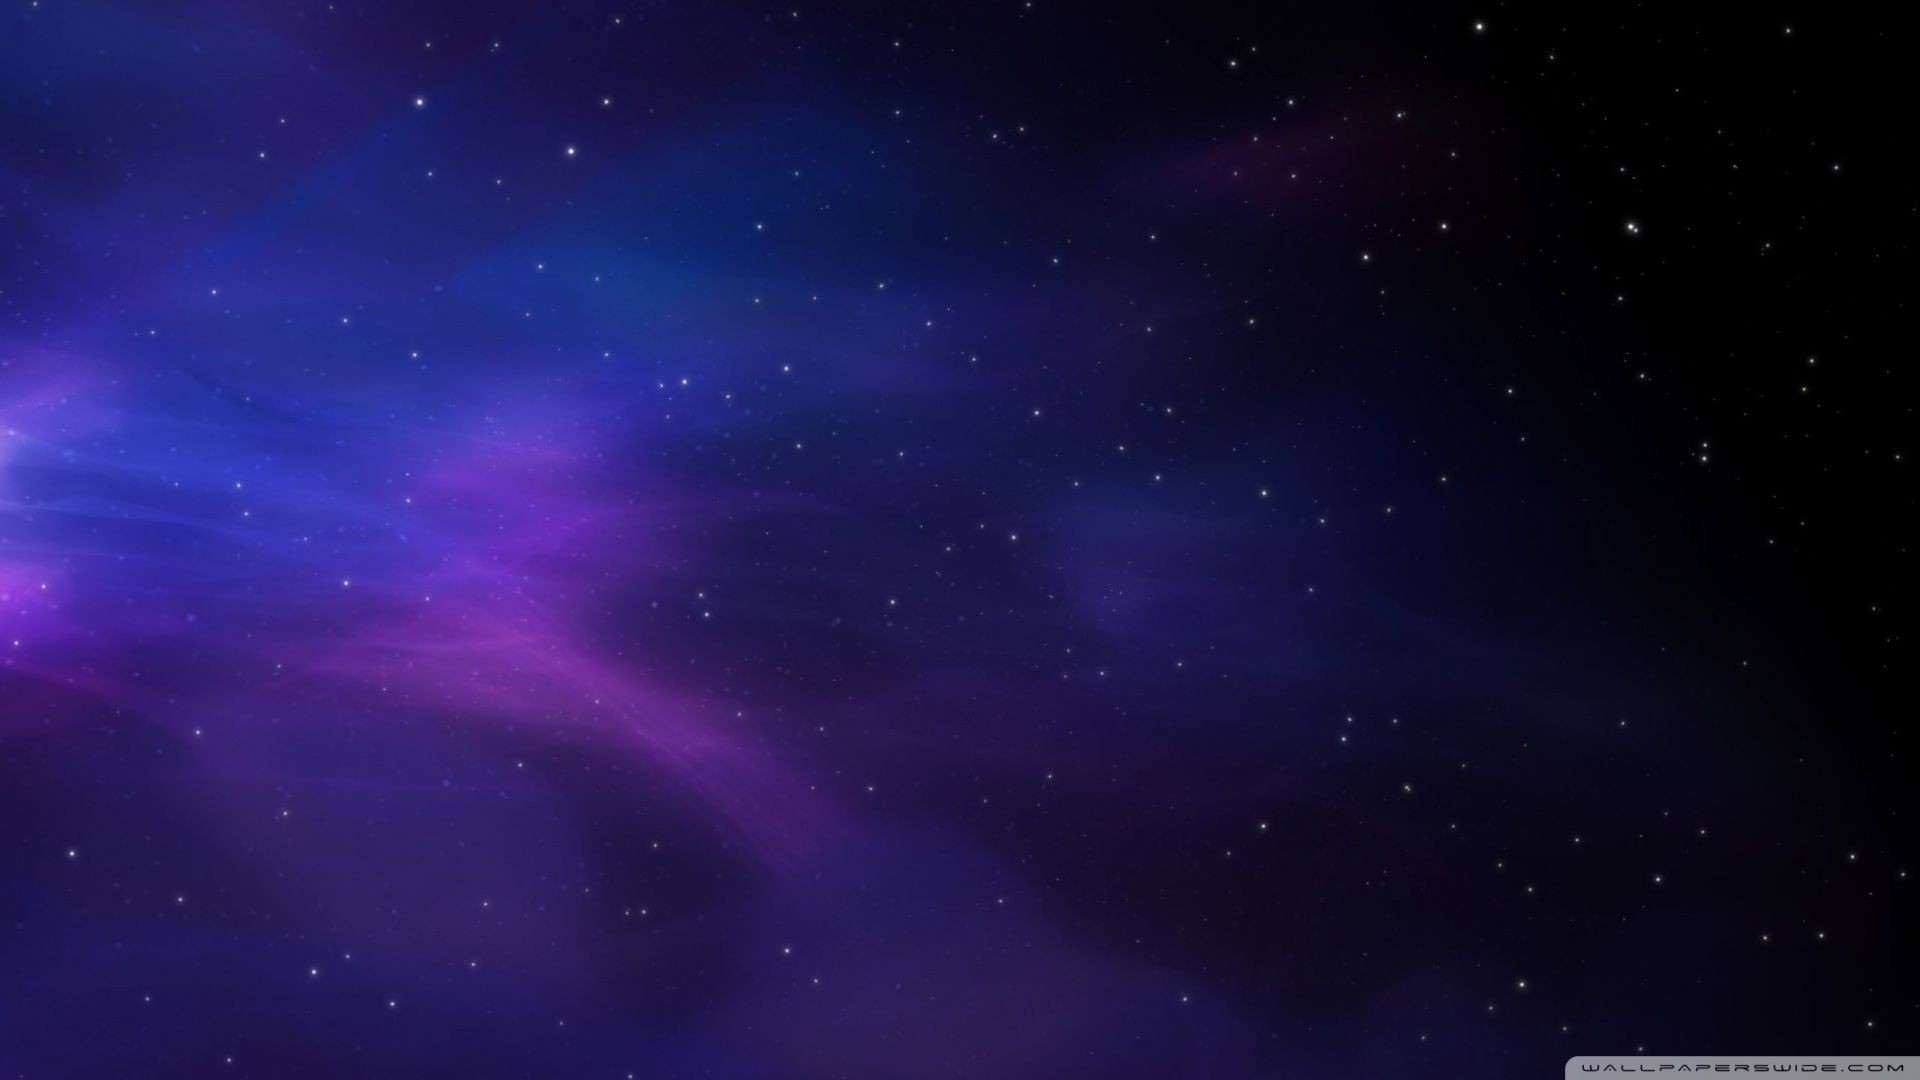 1920x1080 Blue Star In Space Wallpaper - Pics about space